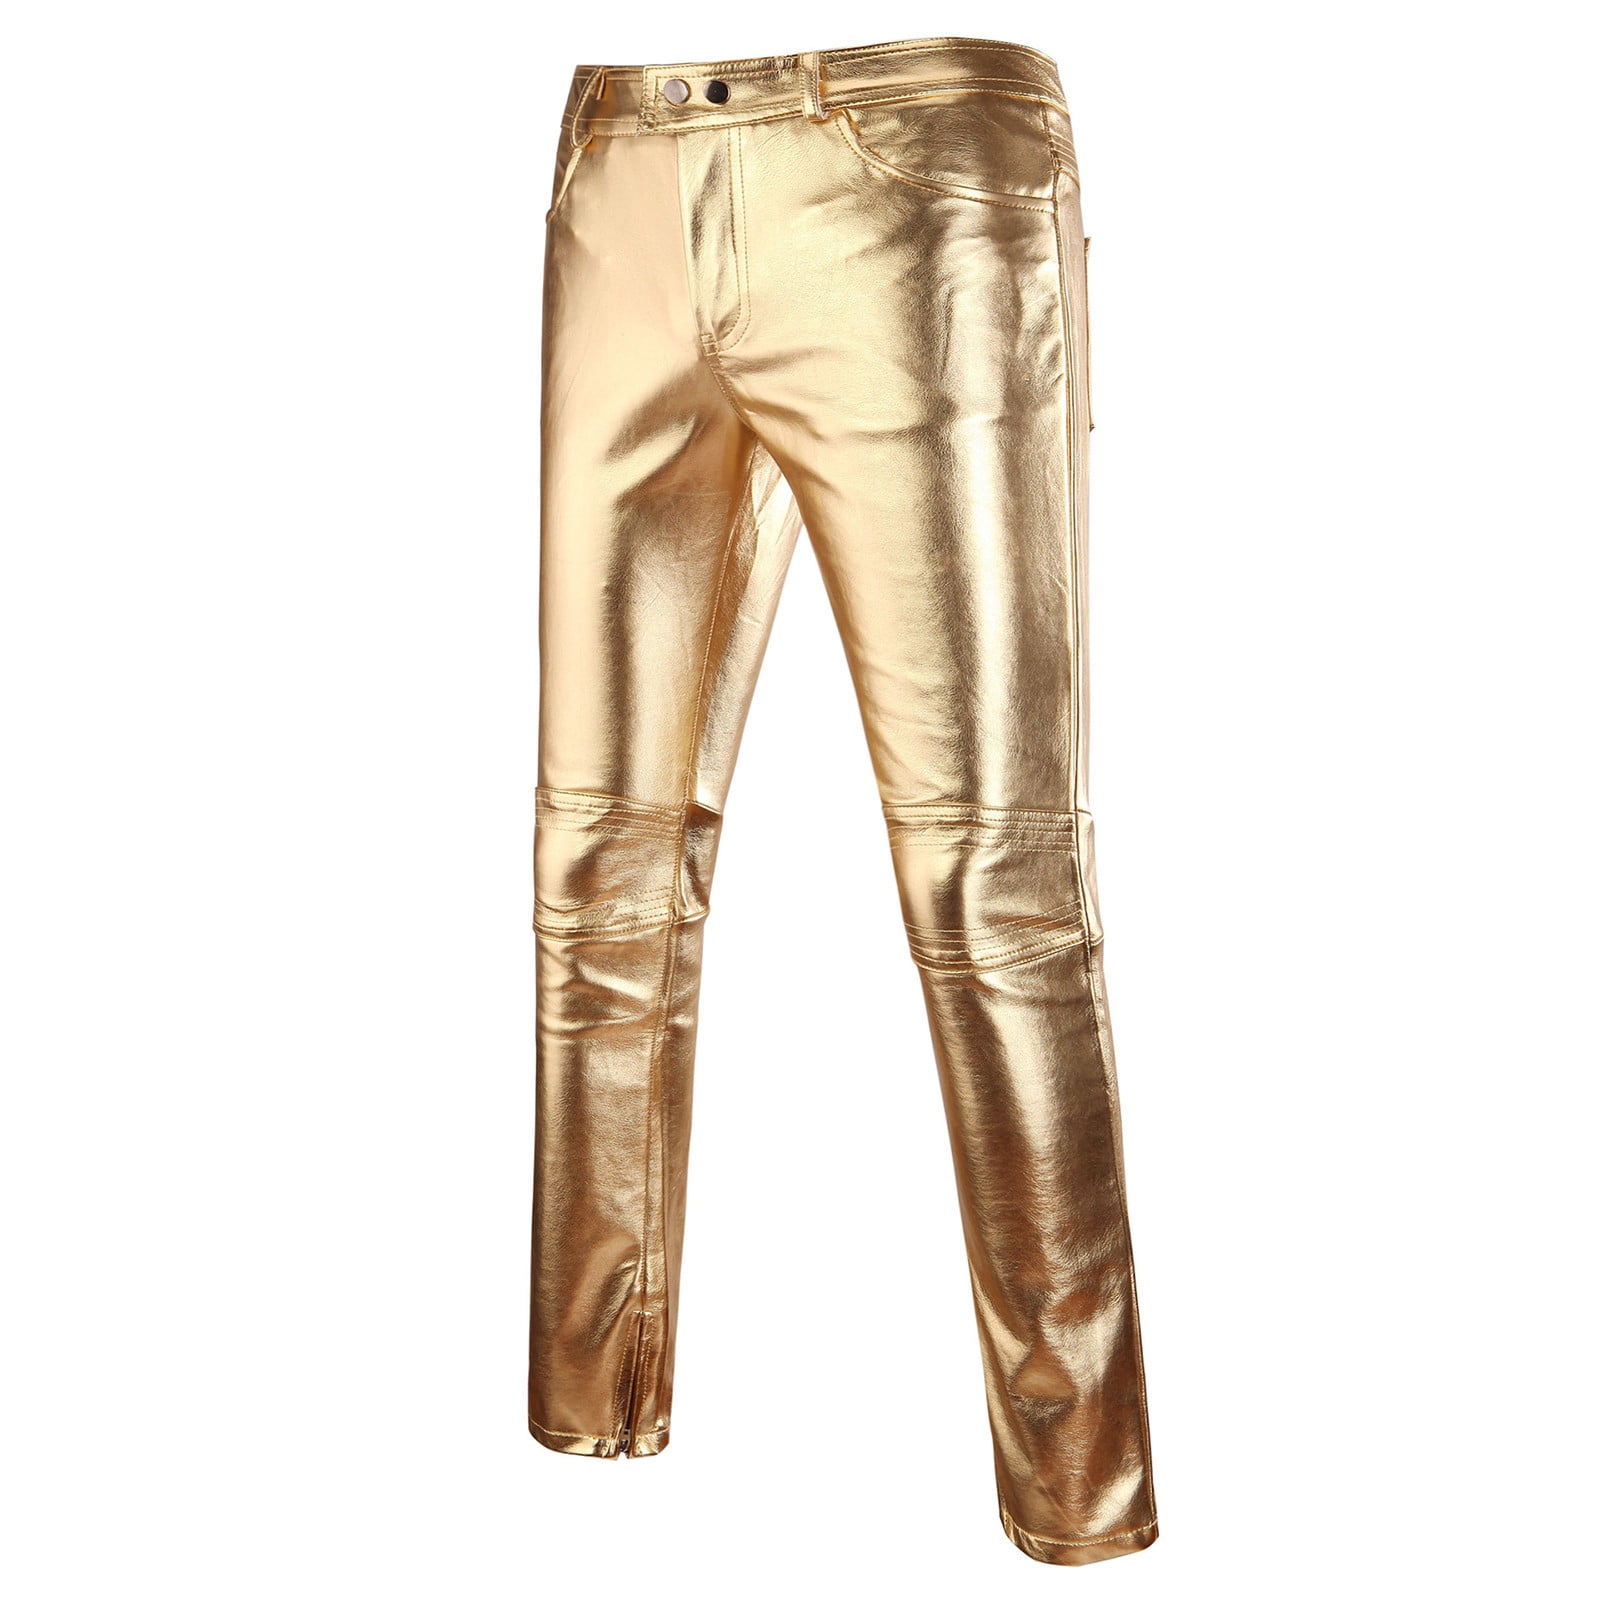 Kayannuo Gold leather Pants Spring Clearance Men's Personality ...